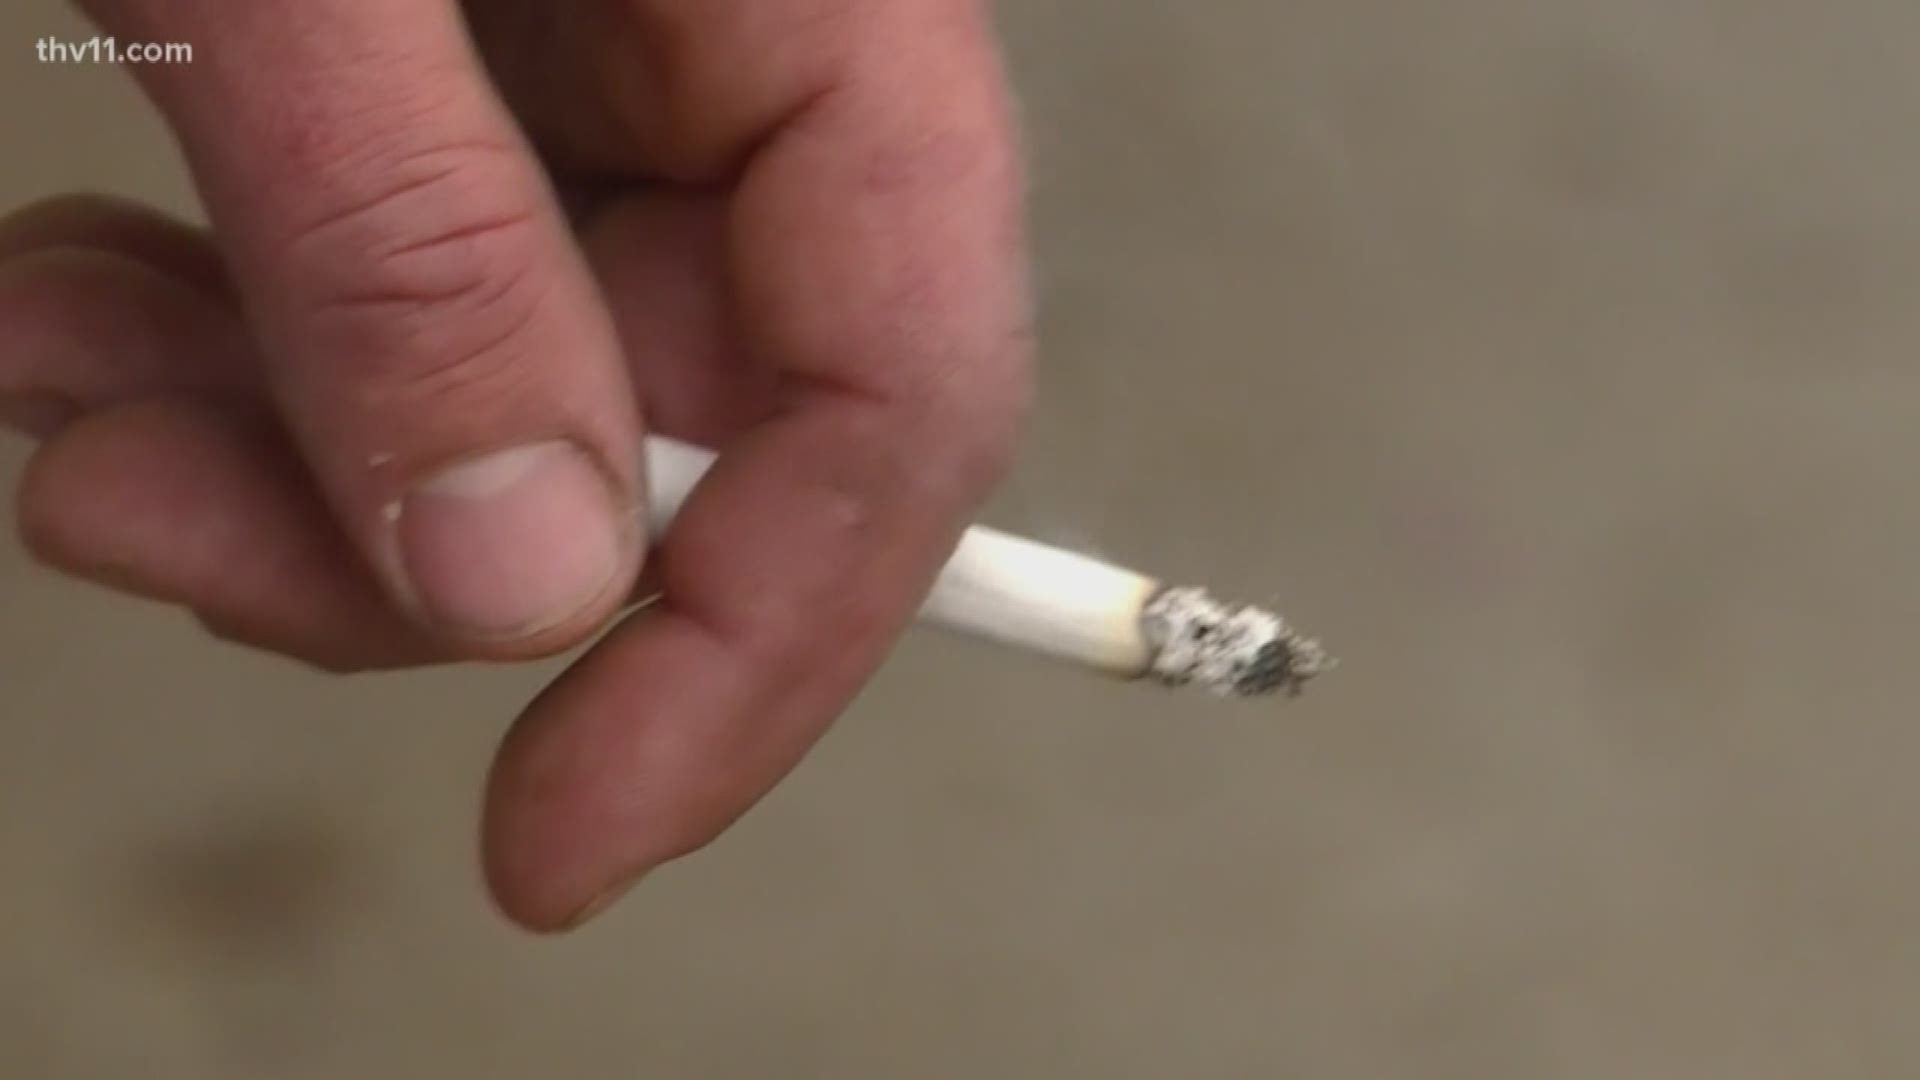 Early studies found the mortality from COVID-19 among smokers is about 9 percent, compared to 4 percent among non-smokers, officials say.